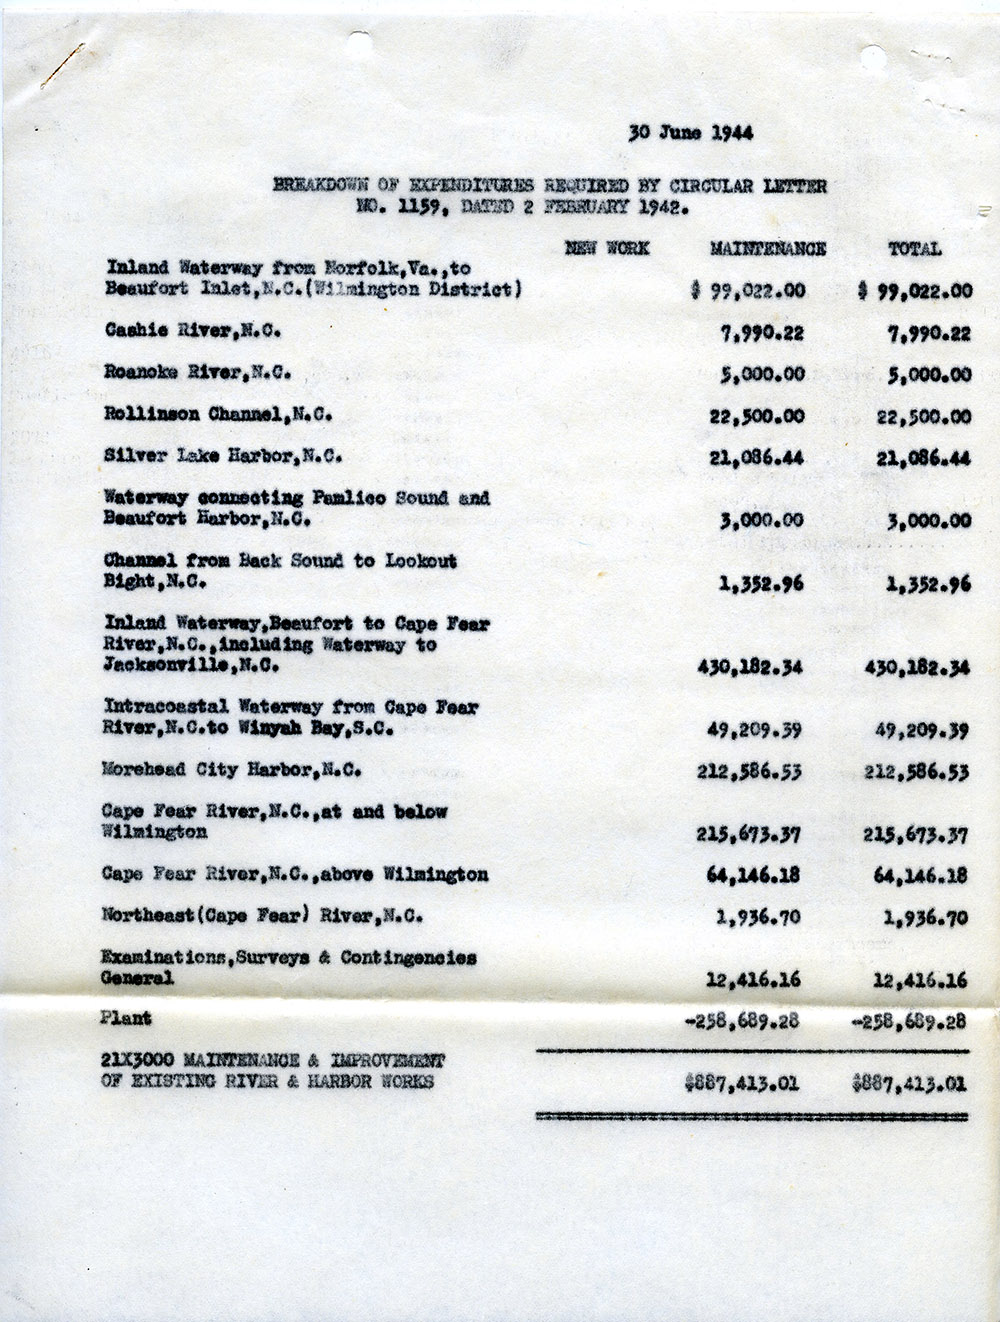 Corps of Engineers Expenditures